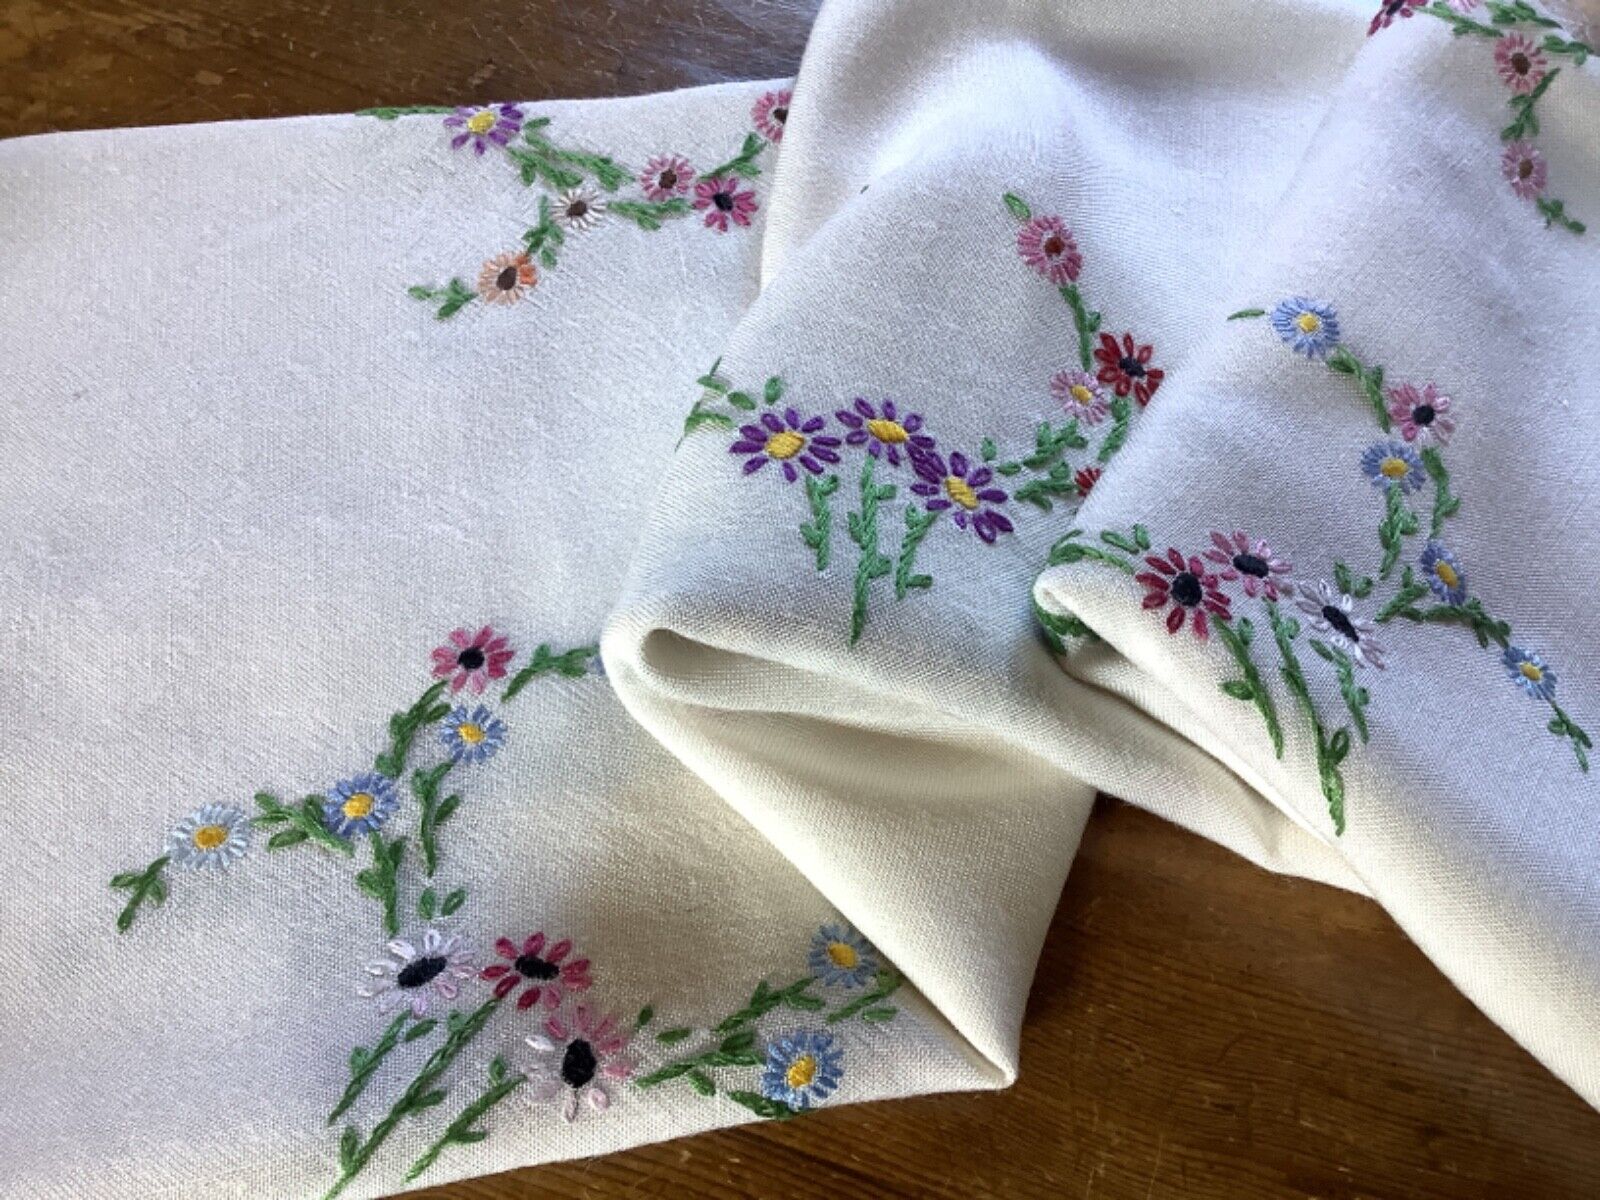 Vintage 1940s White Rayon Tablecloth Hand Embroidered Daisies & Leaves